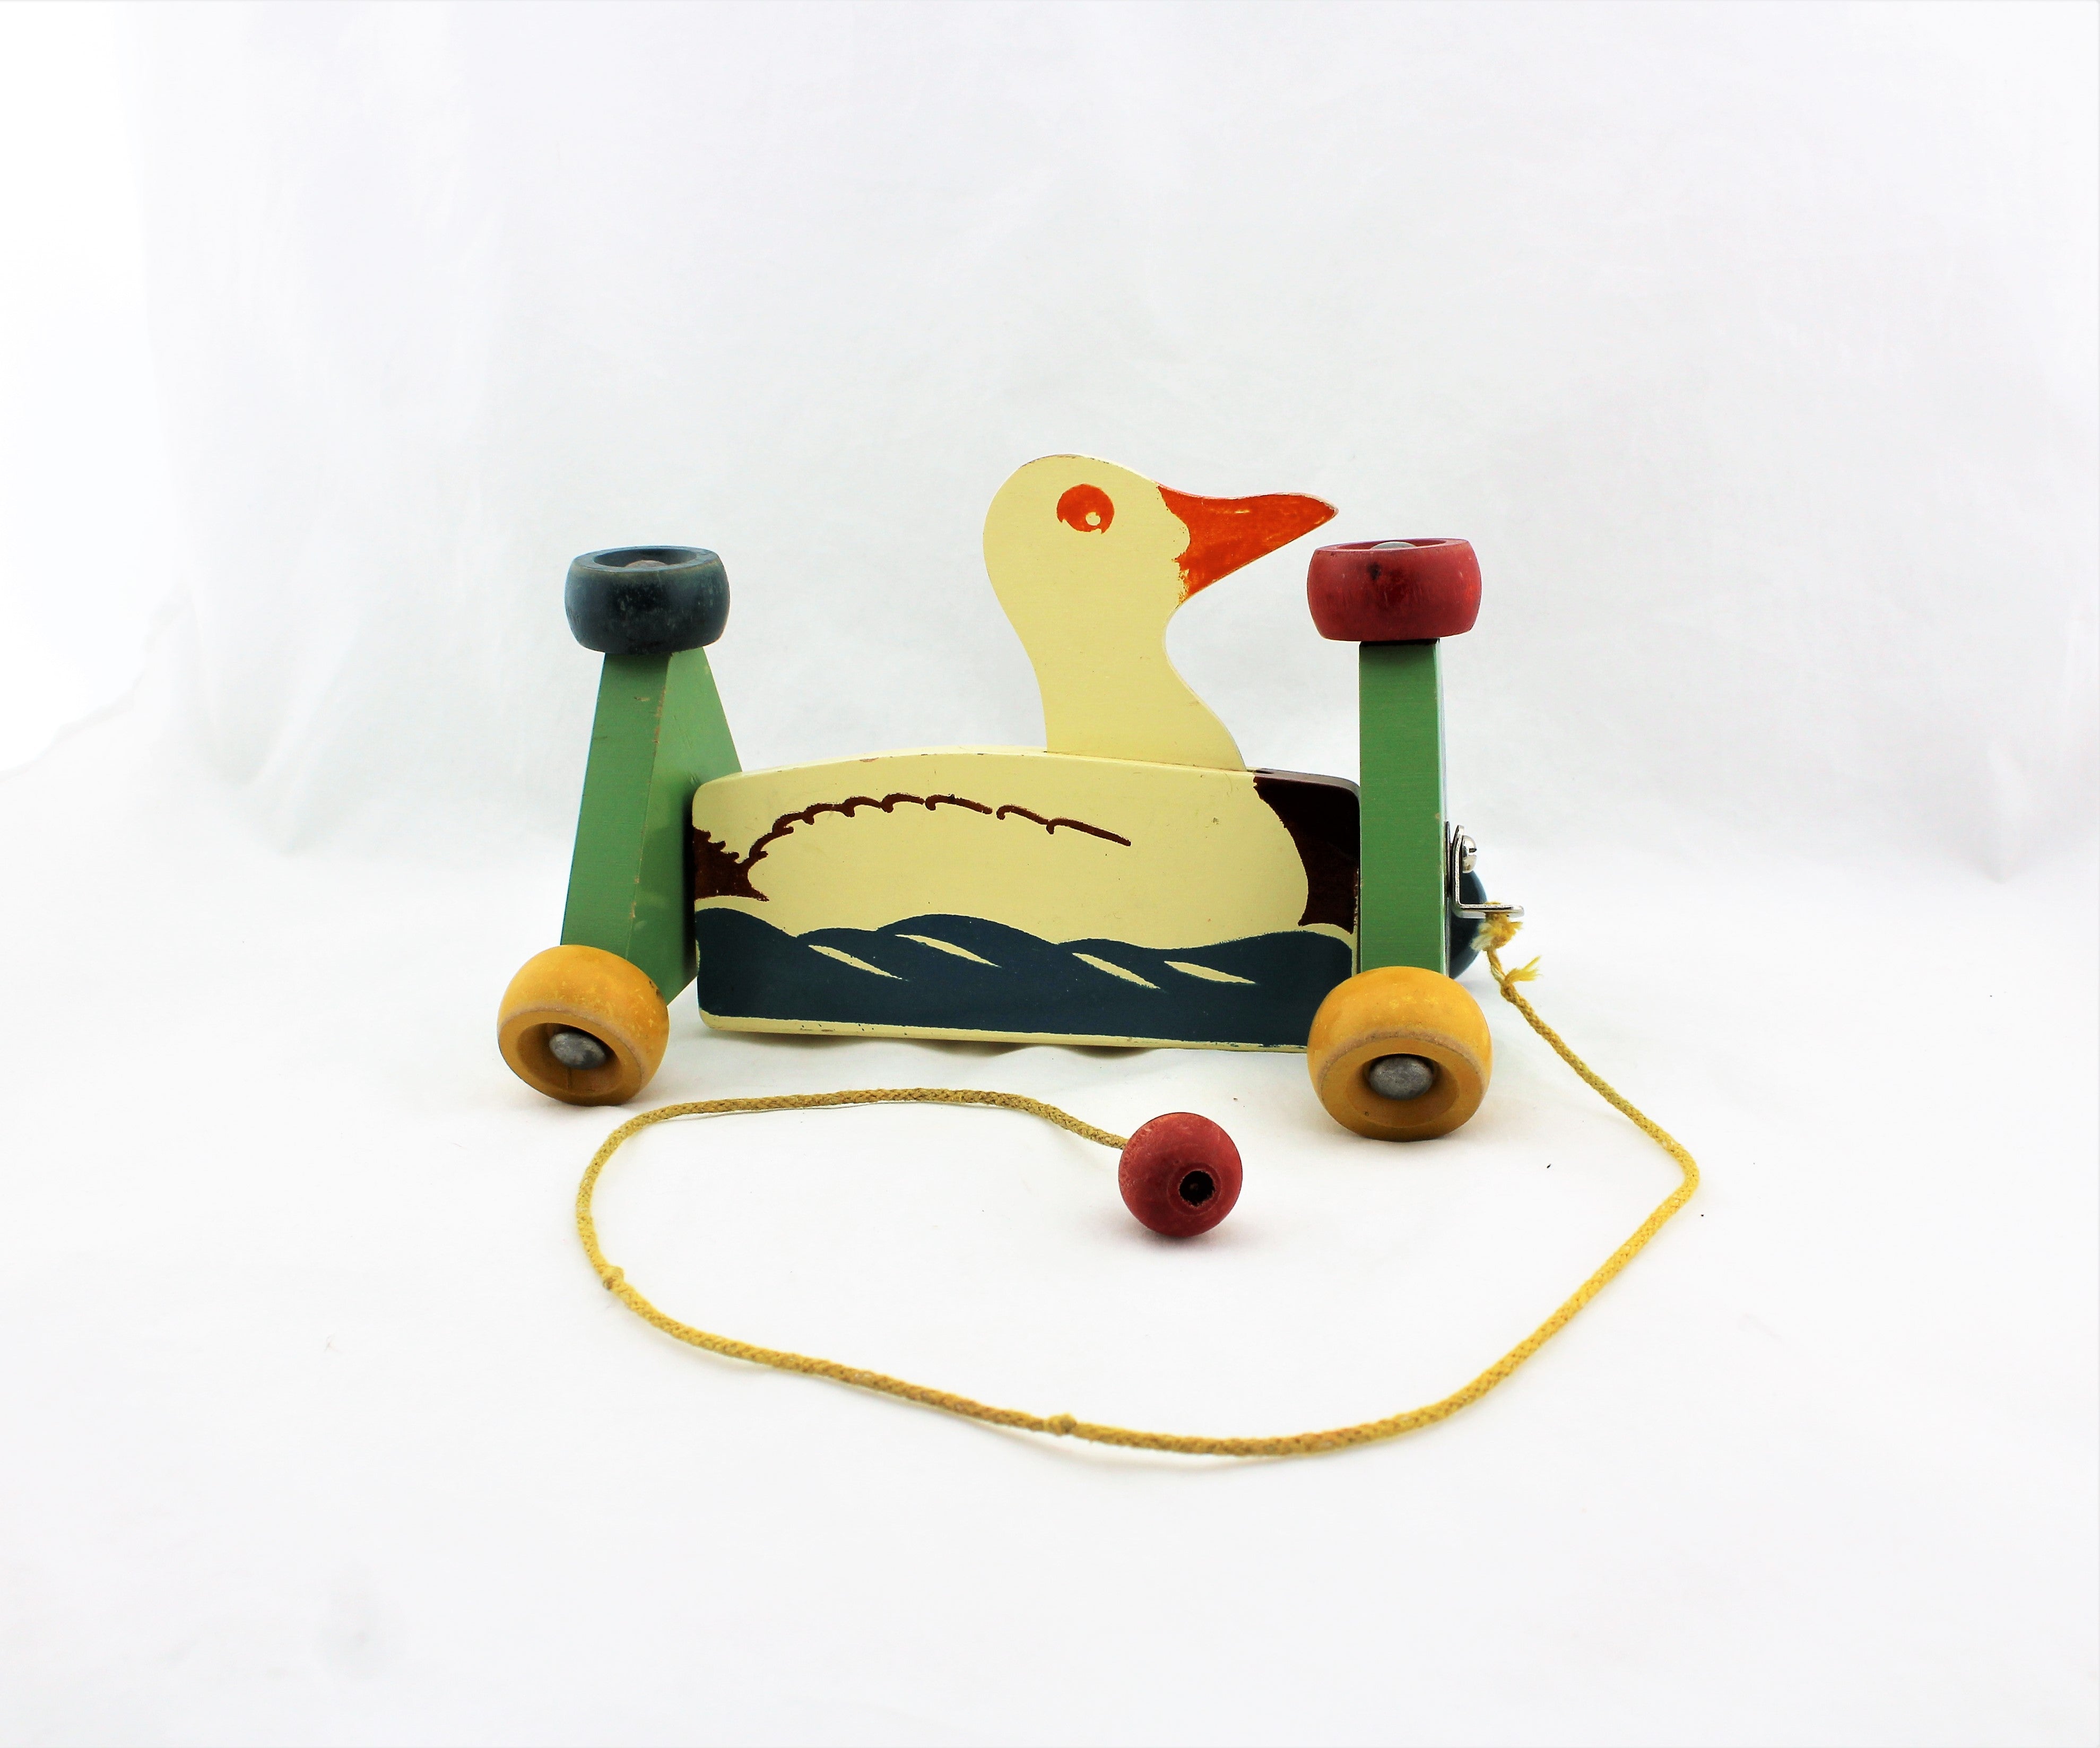 1930s-40s Holgate Pull Duck Toy